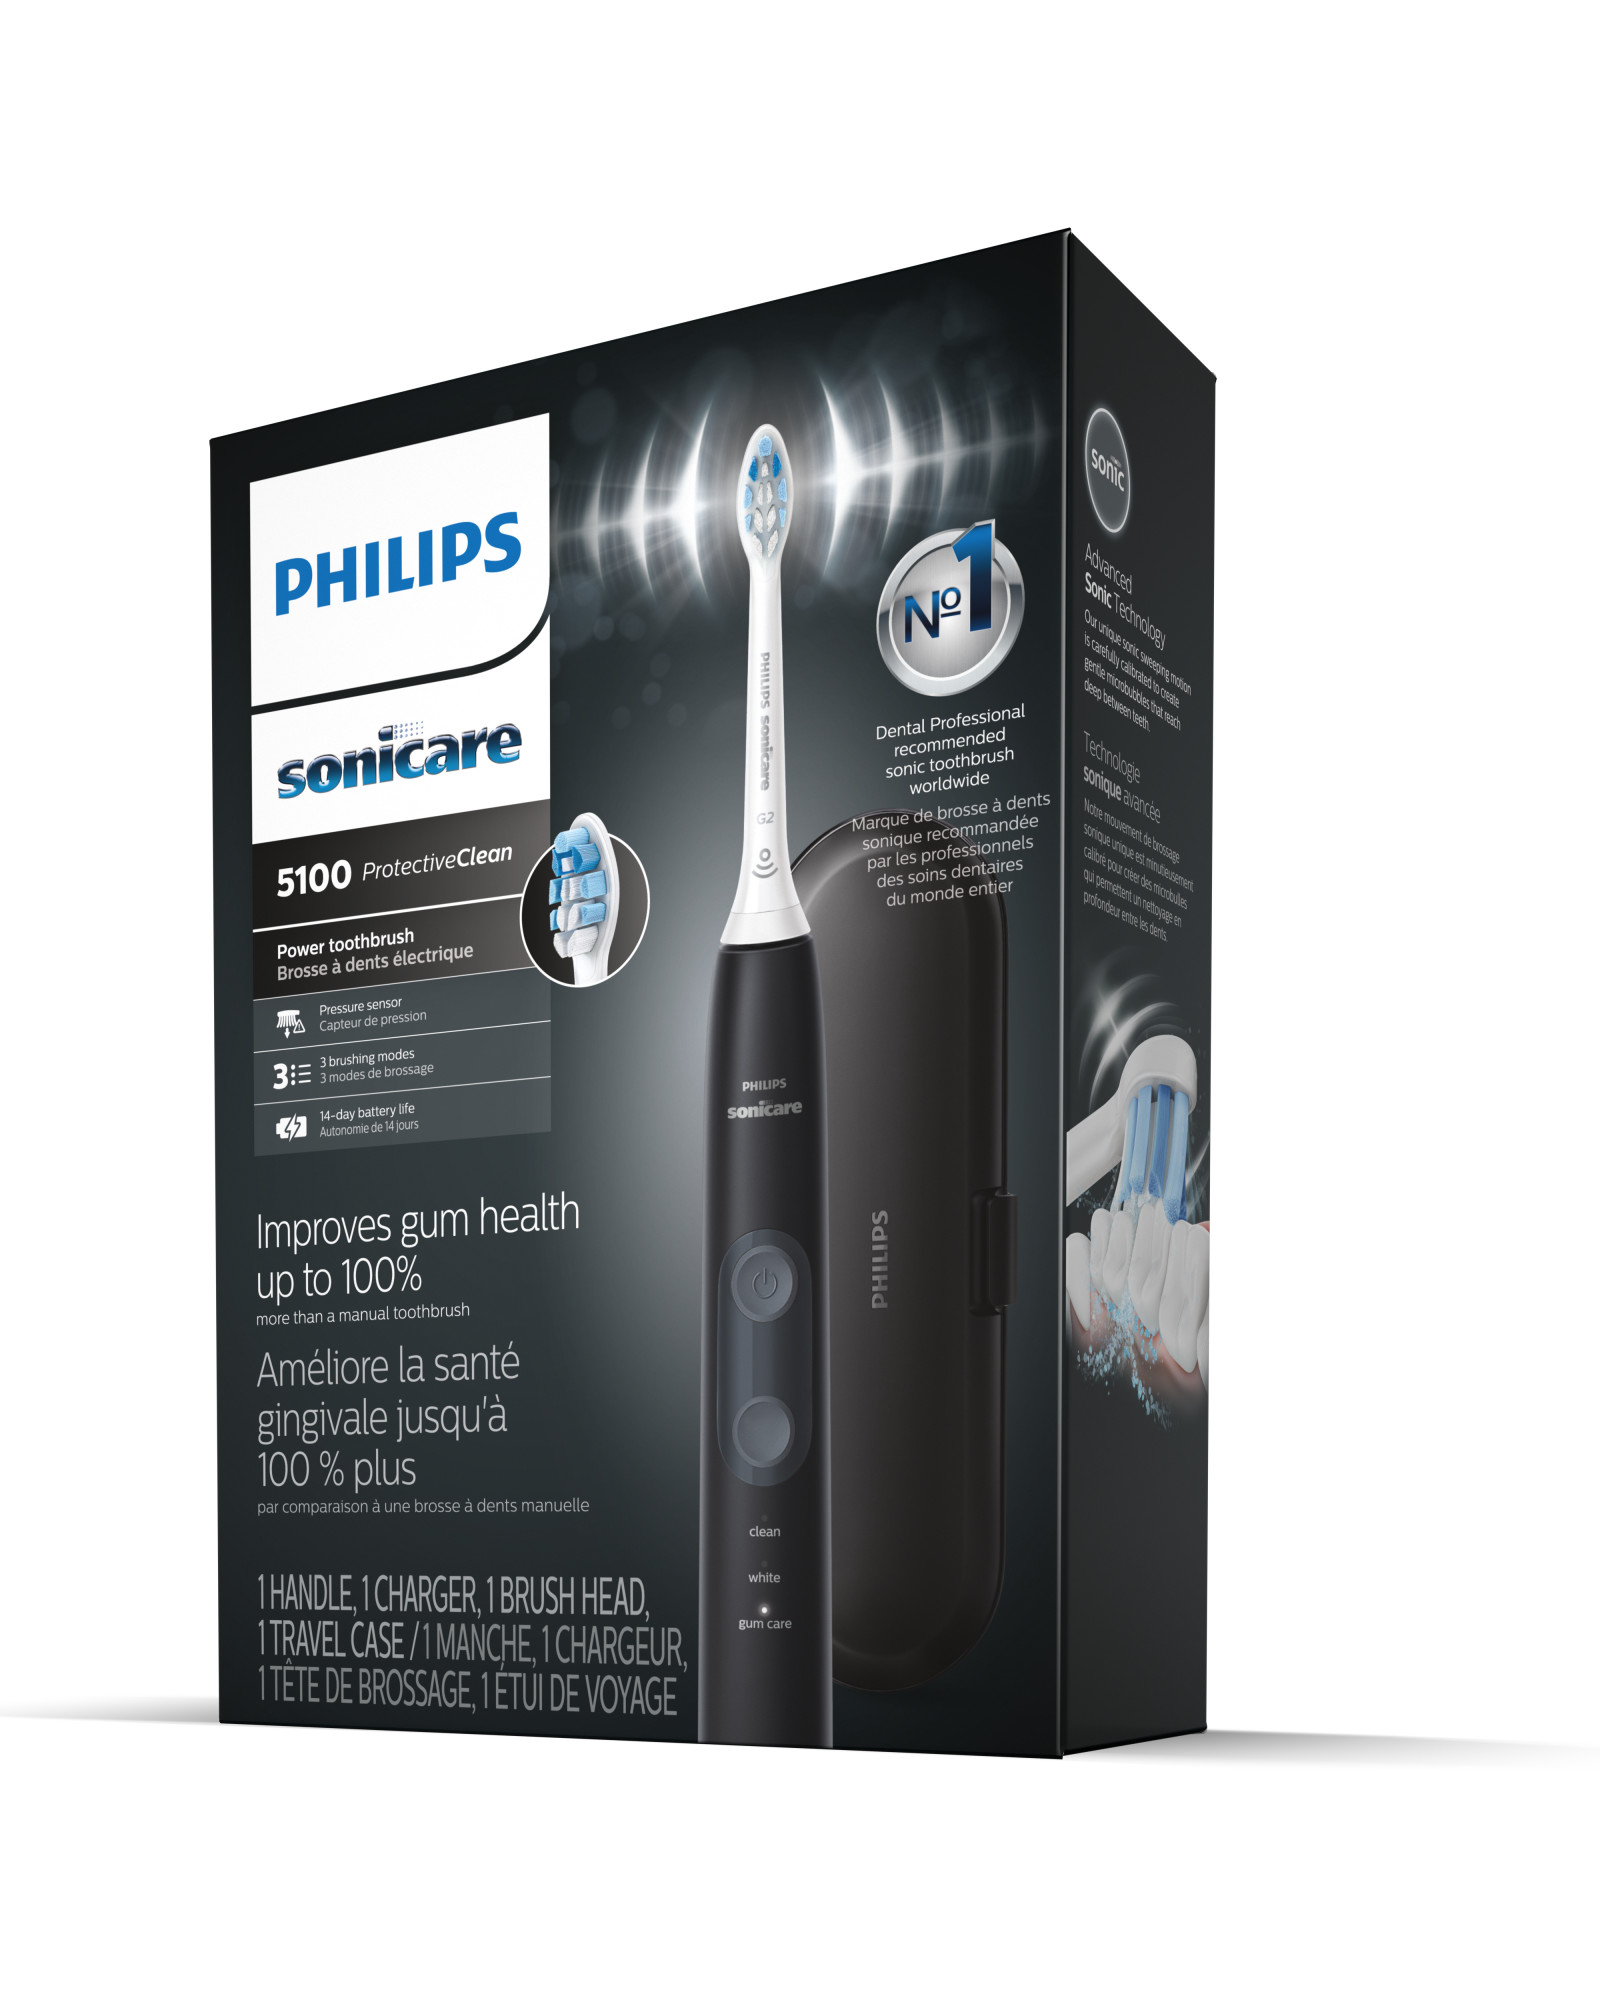 Philips Sonicare ProtectiveClean 5100 Rechargeable Electric Toothbrush, Black Hx6850/60 - image 3 of 5